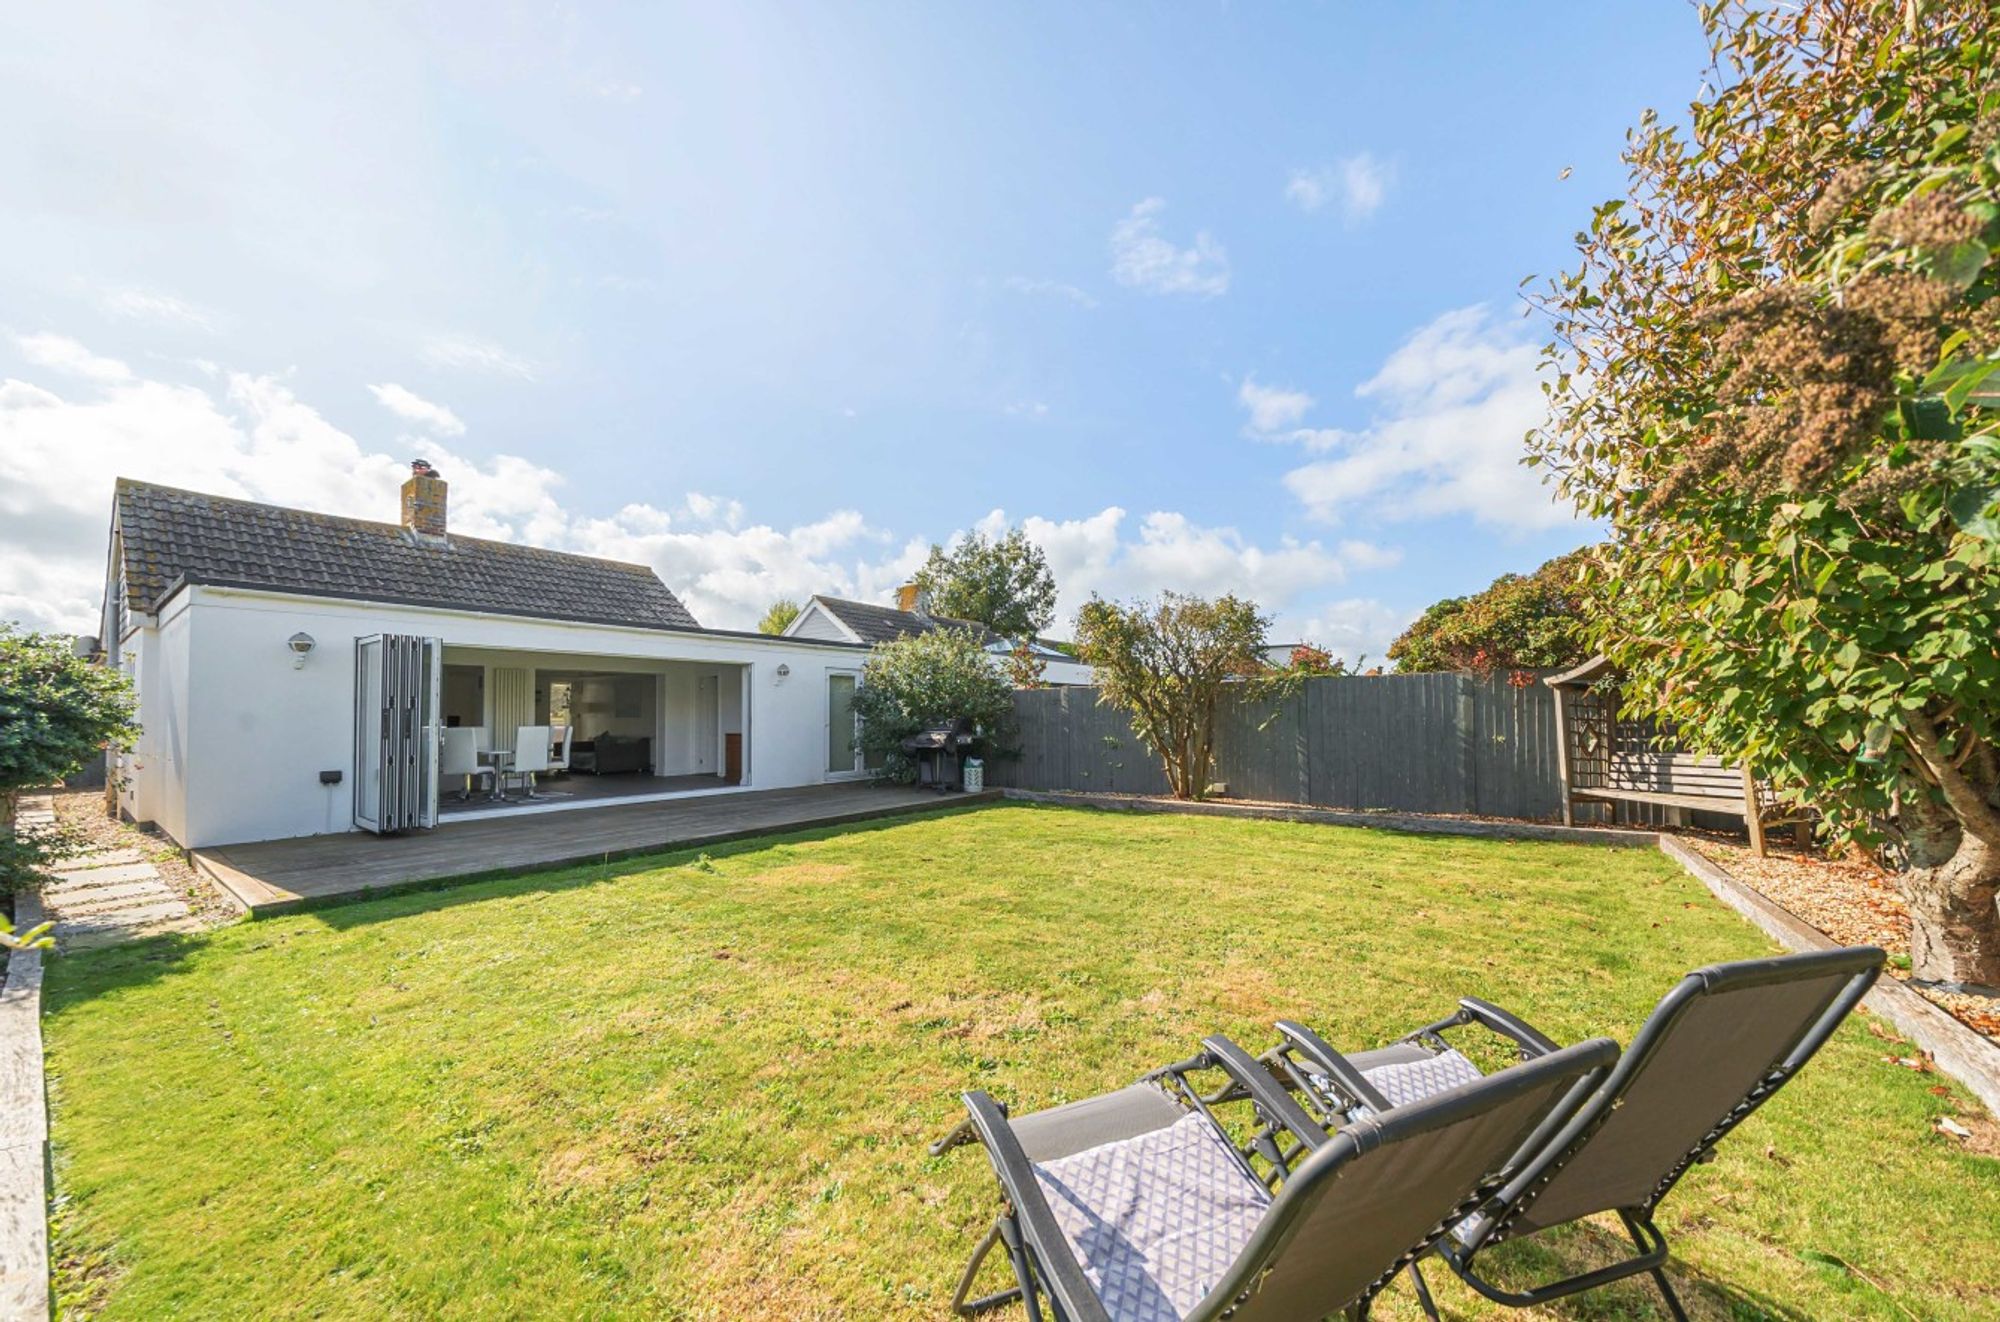 Southcote Avenue, West Wittering, PO20